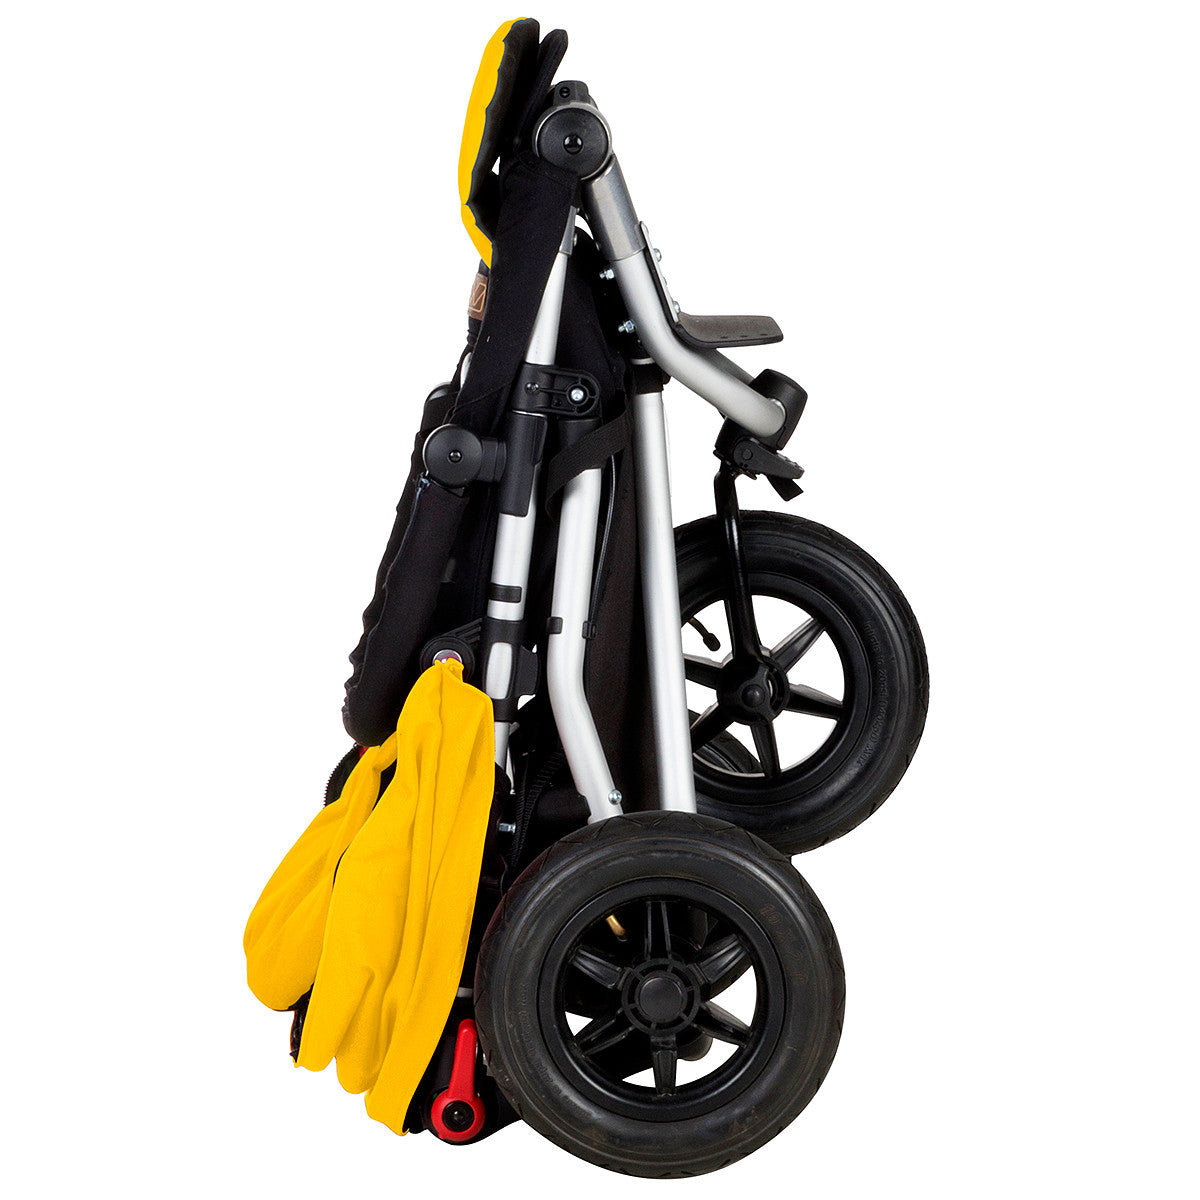 mountain buggy strollers clearance